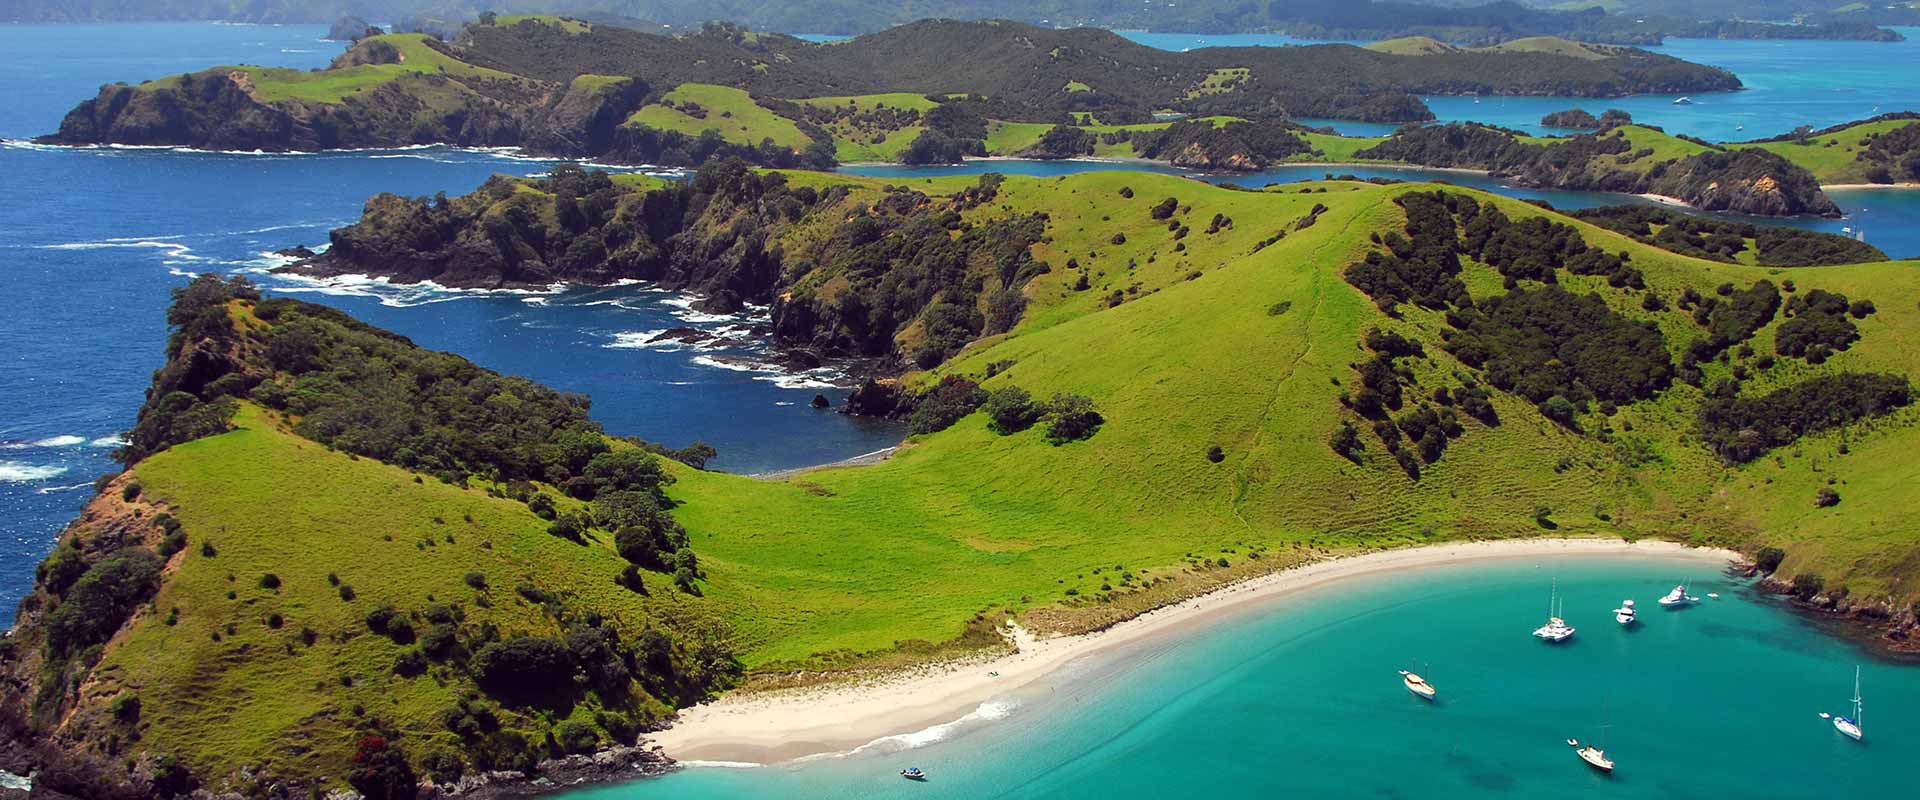 Aerial view across stunning bay of islands, New Zealand